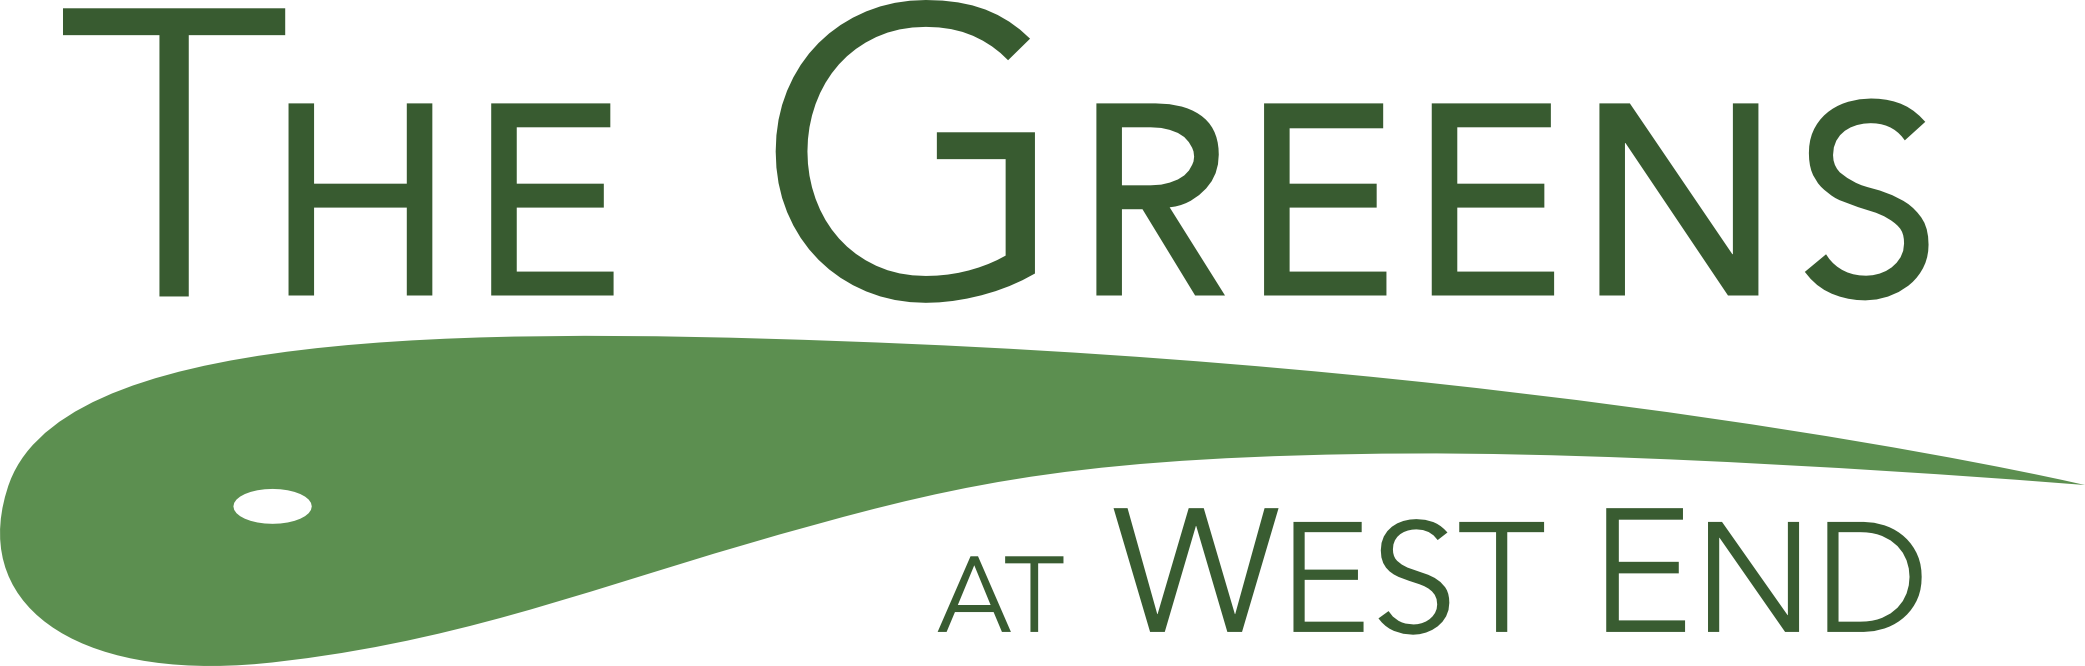 The Greens at West End